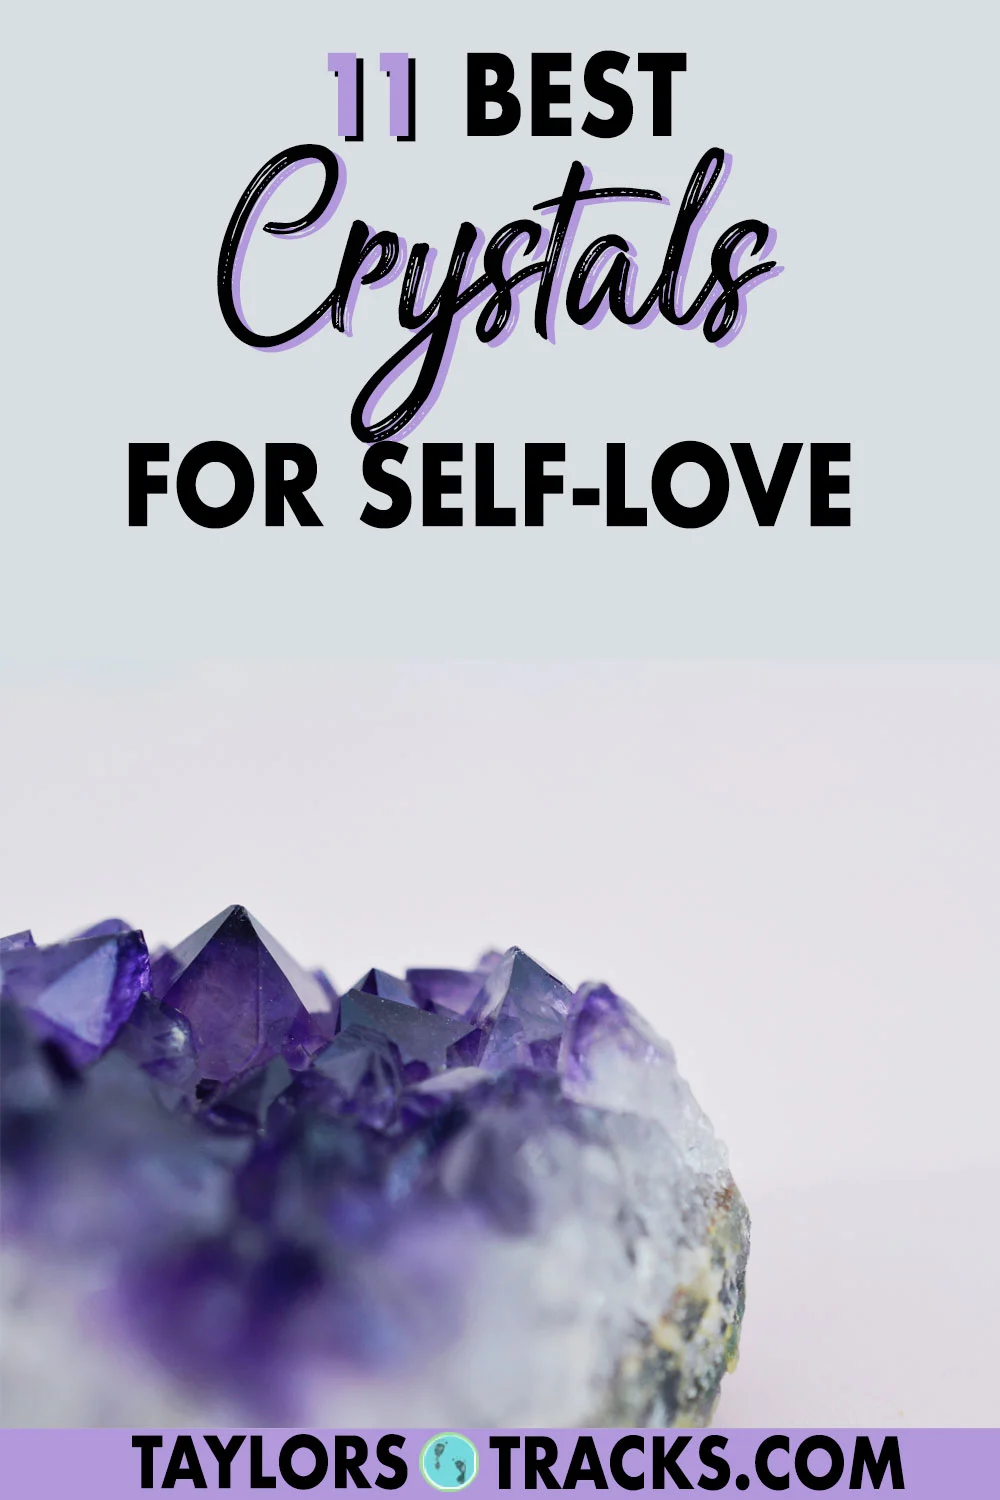 These crystals for self-love and crystals for confidence are perfect to keep around, add to your self-care practice or spiritual practice and decorate your home. Click to find out which crystals suit your self-love needs best!